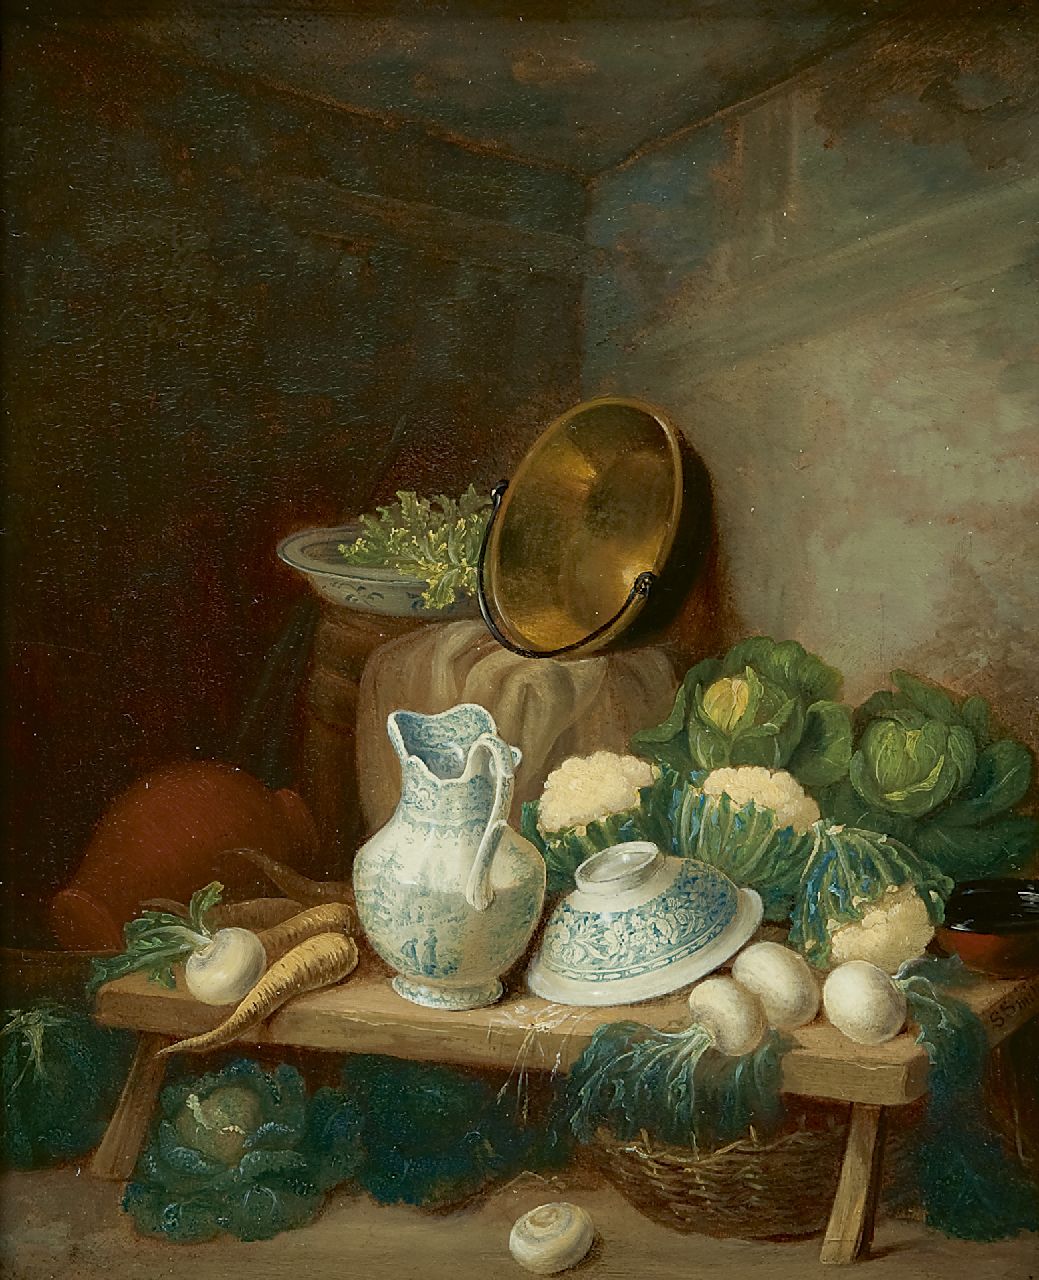 Samuel Smith | A kitchen still life, Öl auf Malereifaser, 21,7 x 17,9 cm, signed l.r. on the edge of table